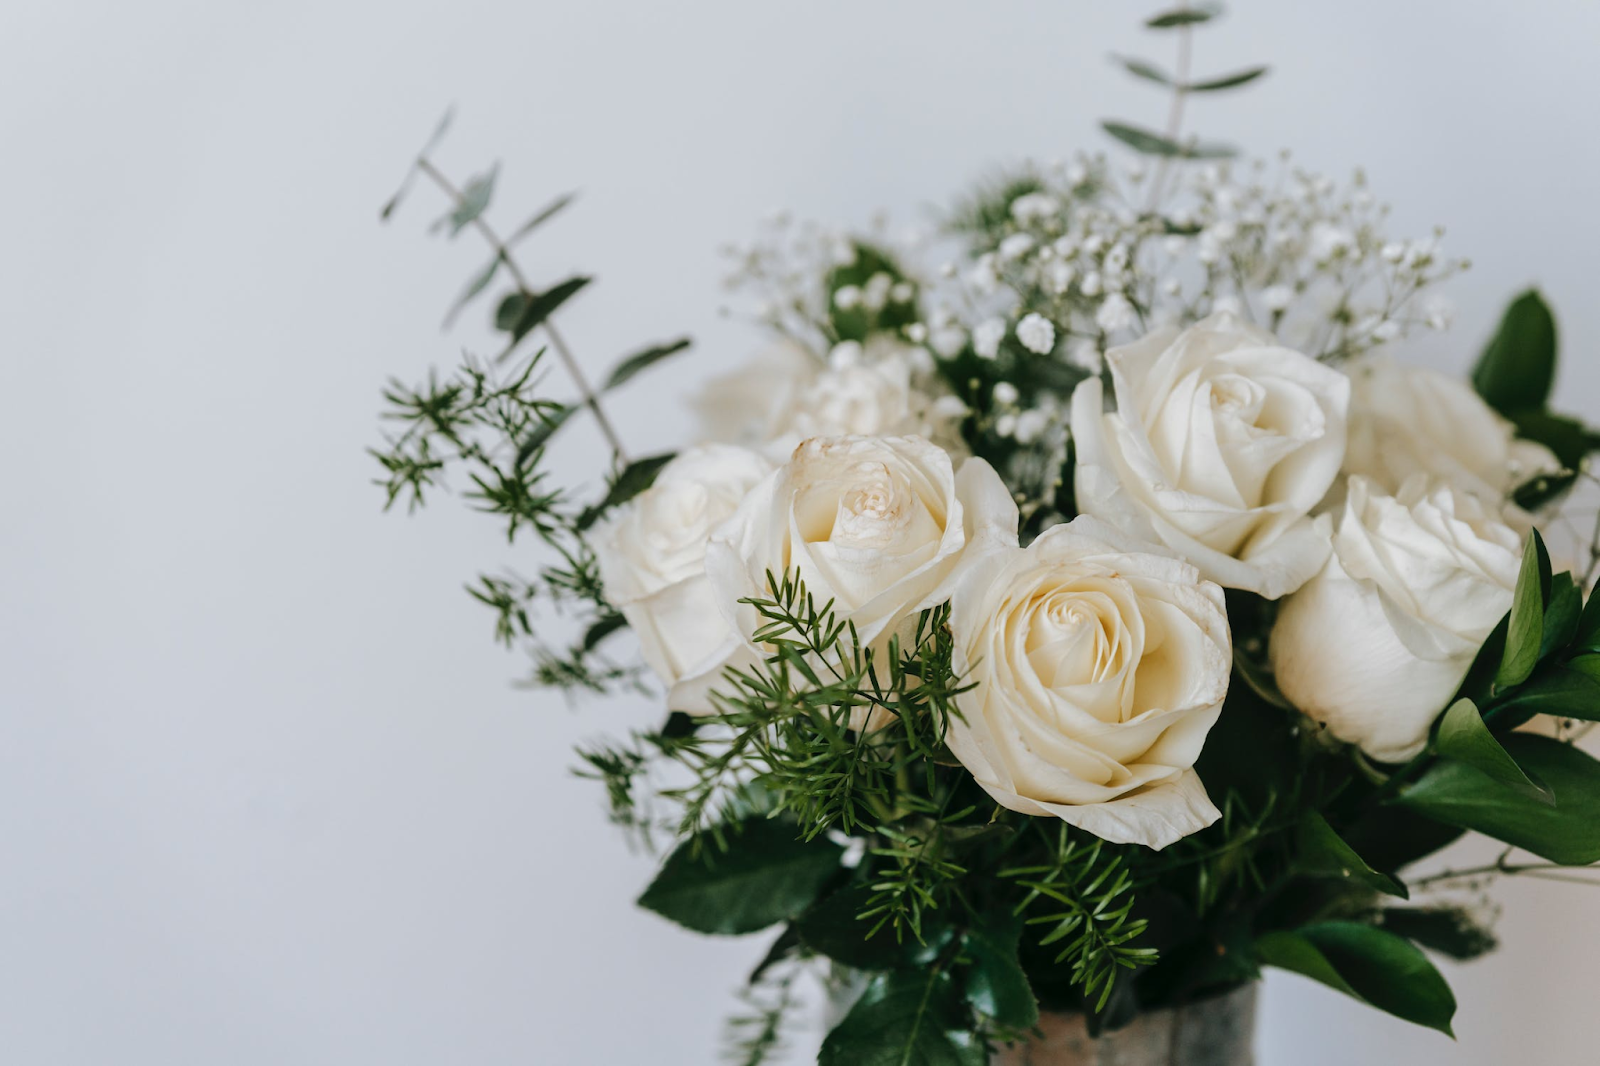 What Does A White Rose Mean? White Roses And Their Significance